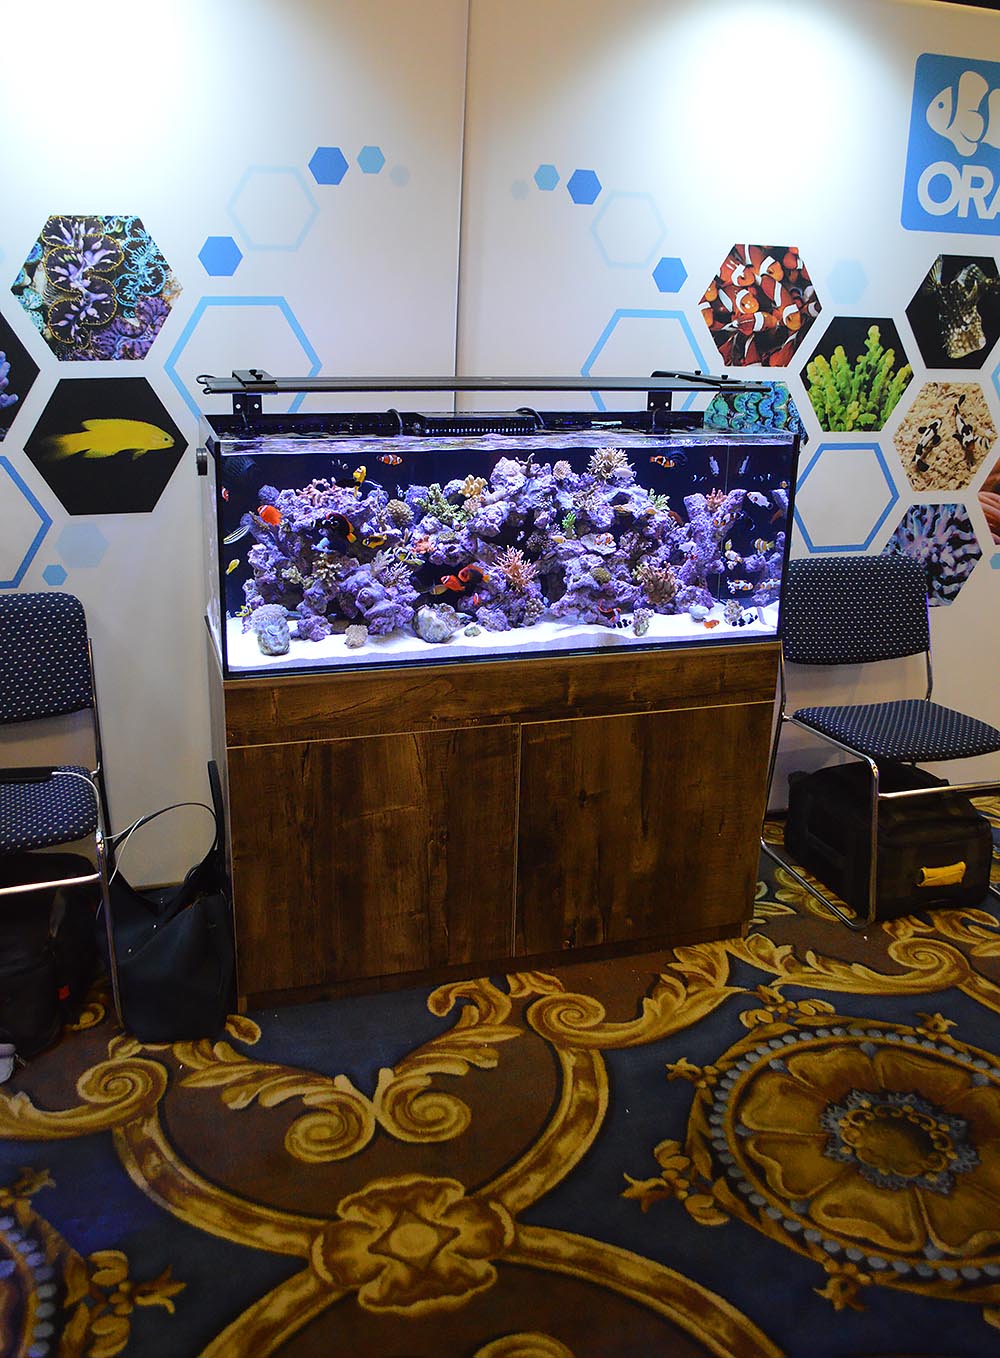 ORA's impressive display of cultured fish and coral would look fantastic in a home or office.